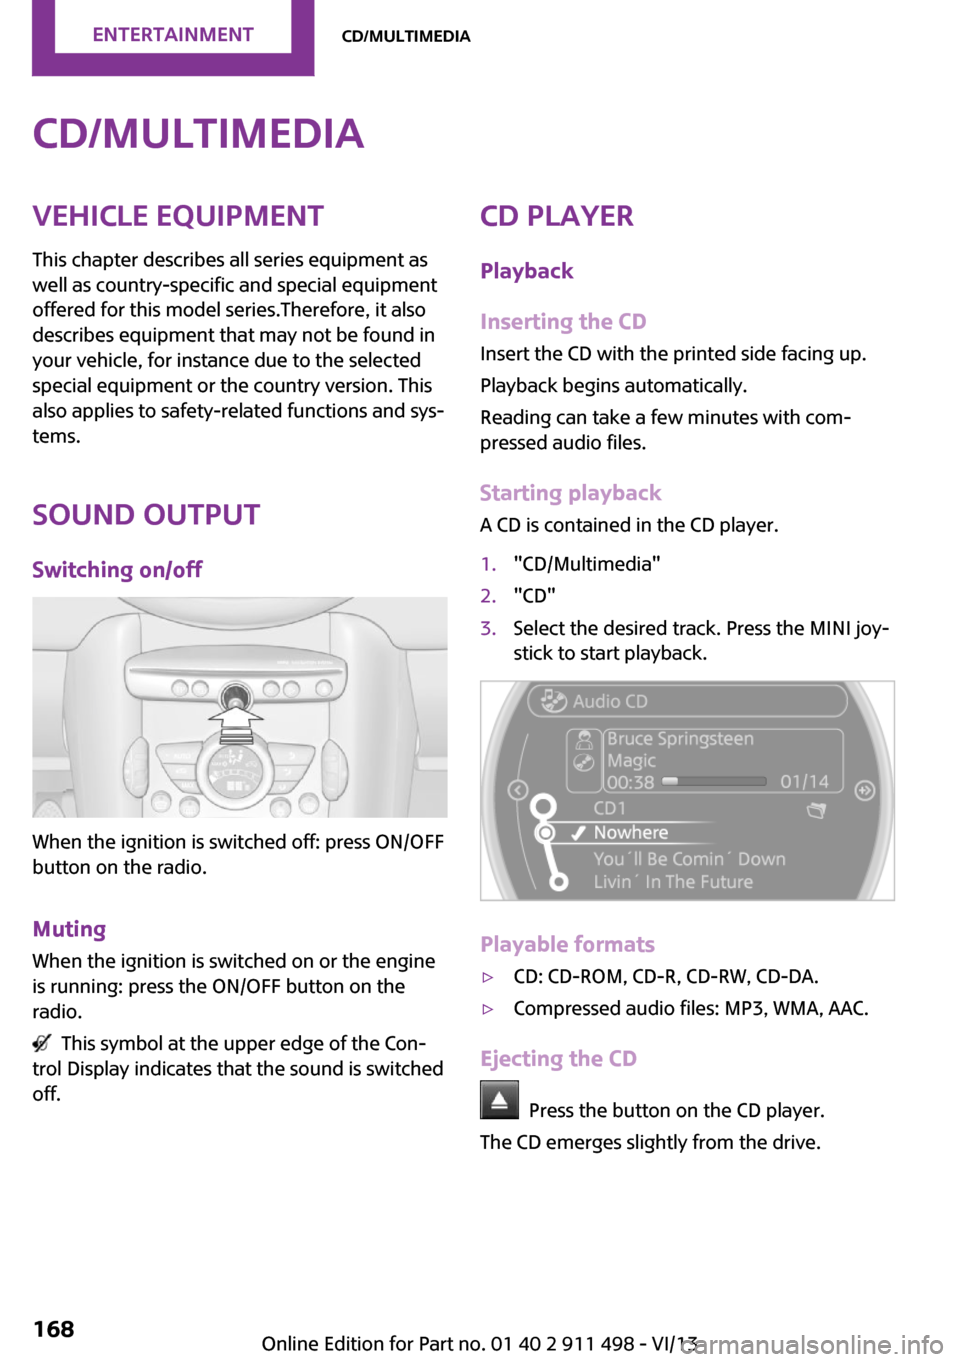 MINI Roadster 2014  Owners Manual (Mini Connected) CD/multimediaVehicle equipment
This chapter describes all series equipment as
well as country-specific and special equipment
offered for this model series.Therefore, it also
describes equipment that m